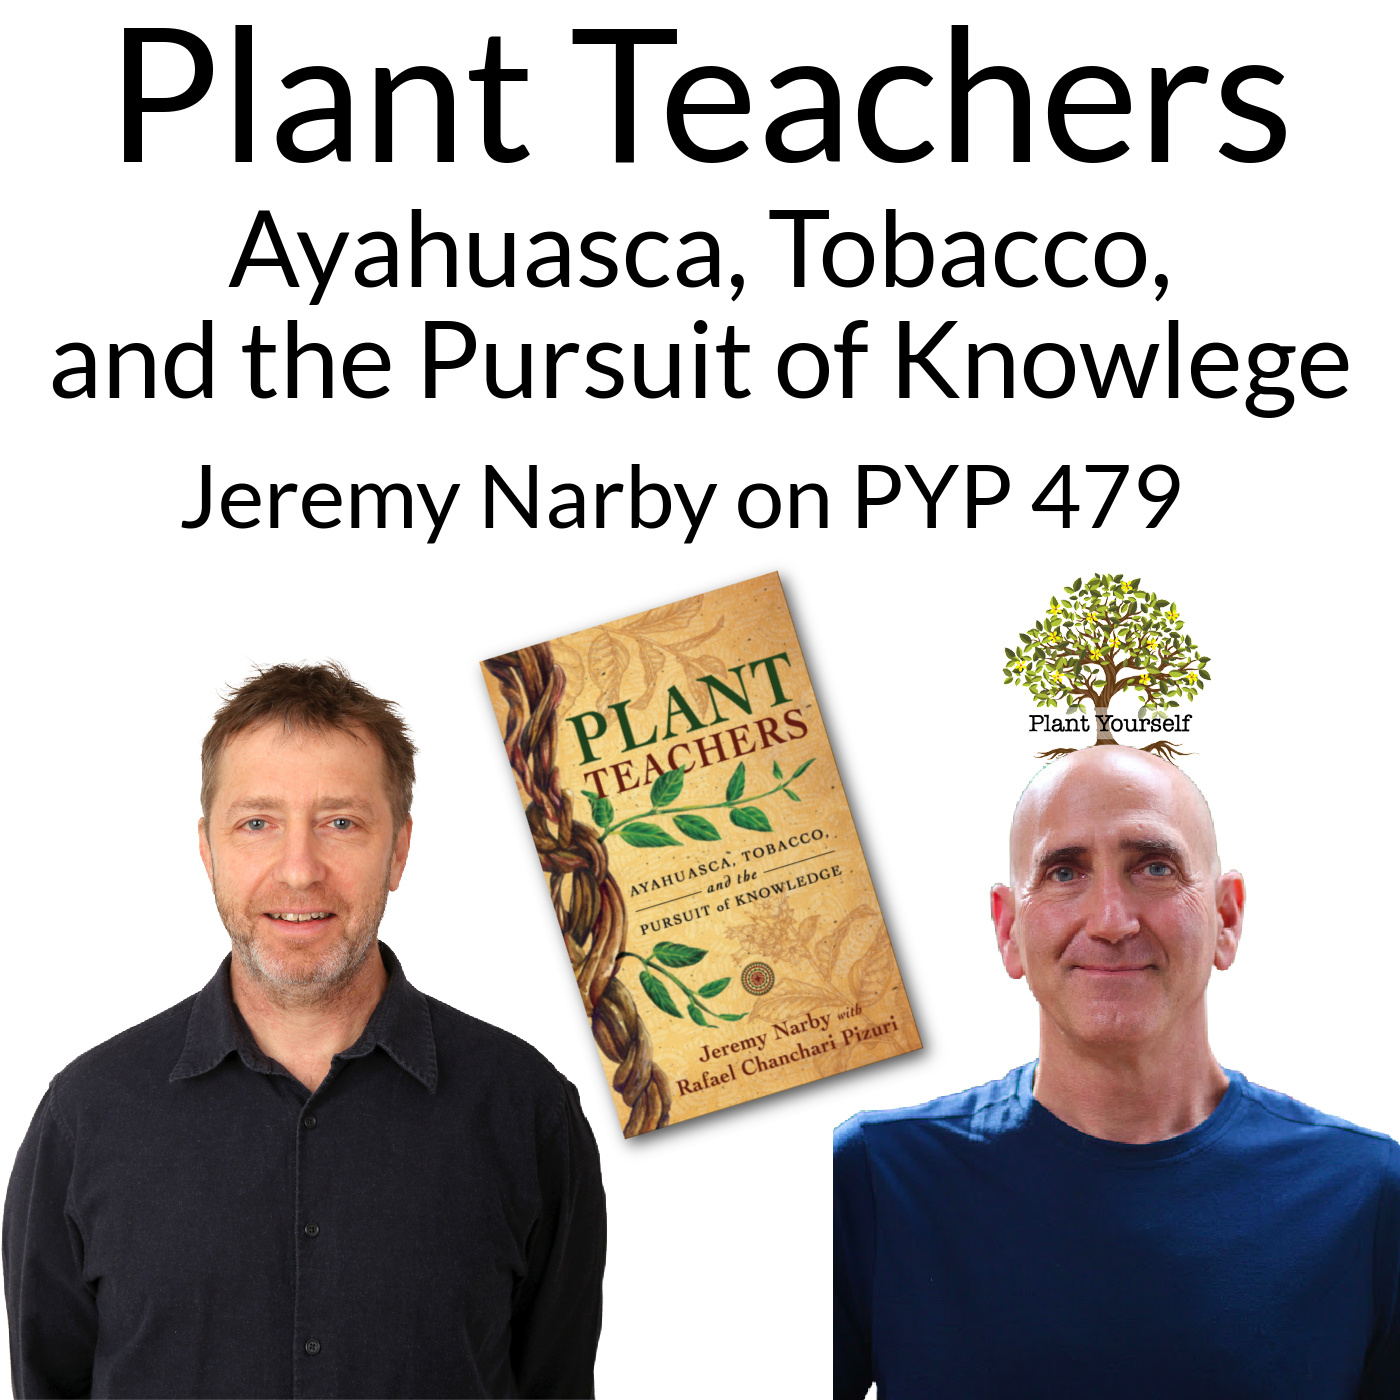 Plant Teachers: Ayahuasca, Tobacco, and the Pursuit of Knowledge: Jeremy Narby on PYP 479